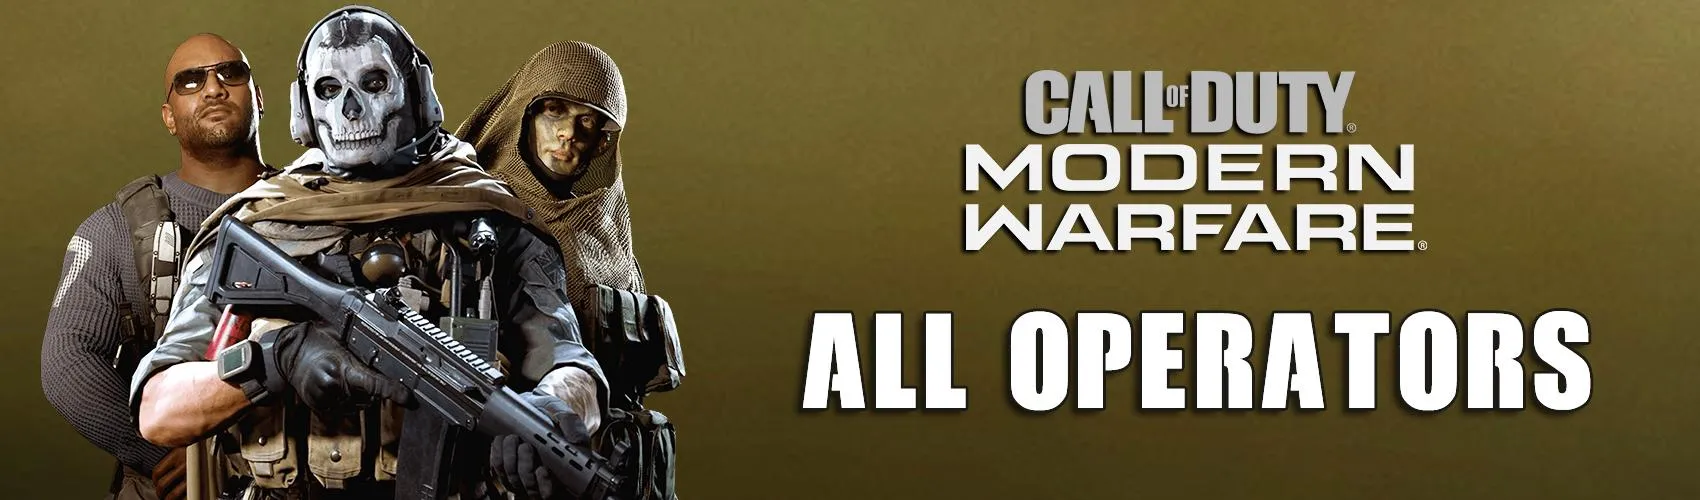 All Operators in Call of Duty: Modern Warfare Warzone - Full List of Characters for Coalition and Allegiance Factions